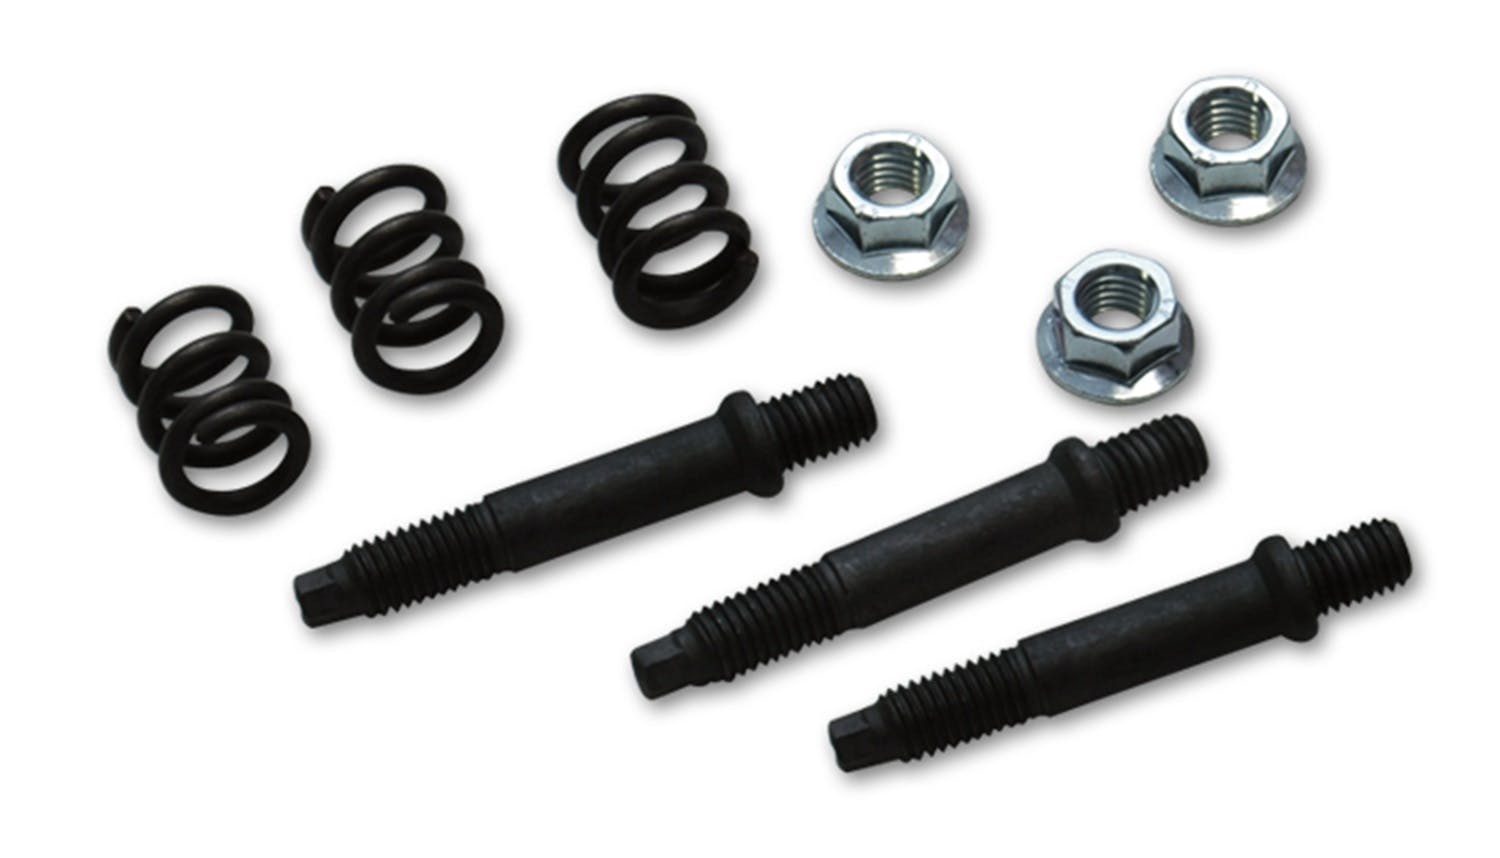 Vibrant Performance 10113 10mm GM Style Spring Bolt Kit, 3 bolt (3 springs, 3 bolts, 3 nuts)